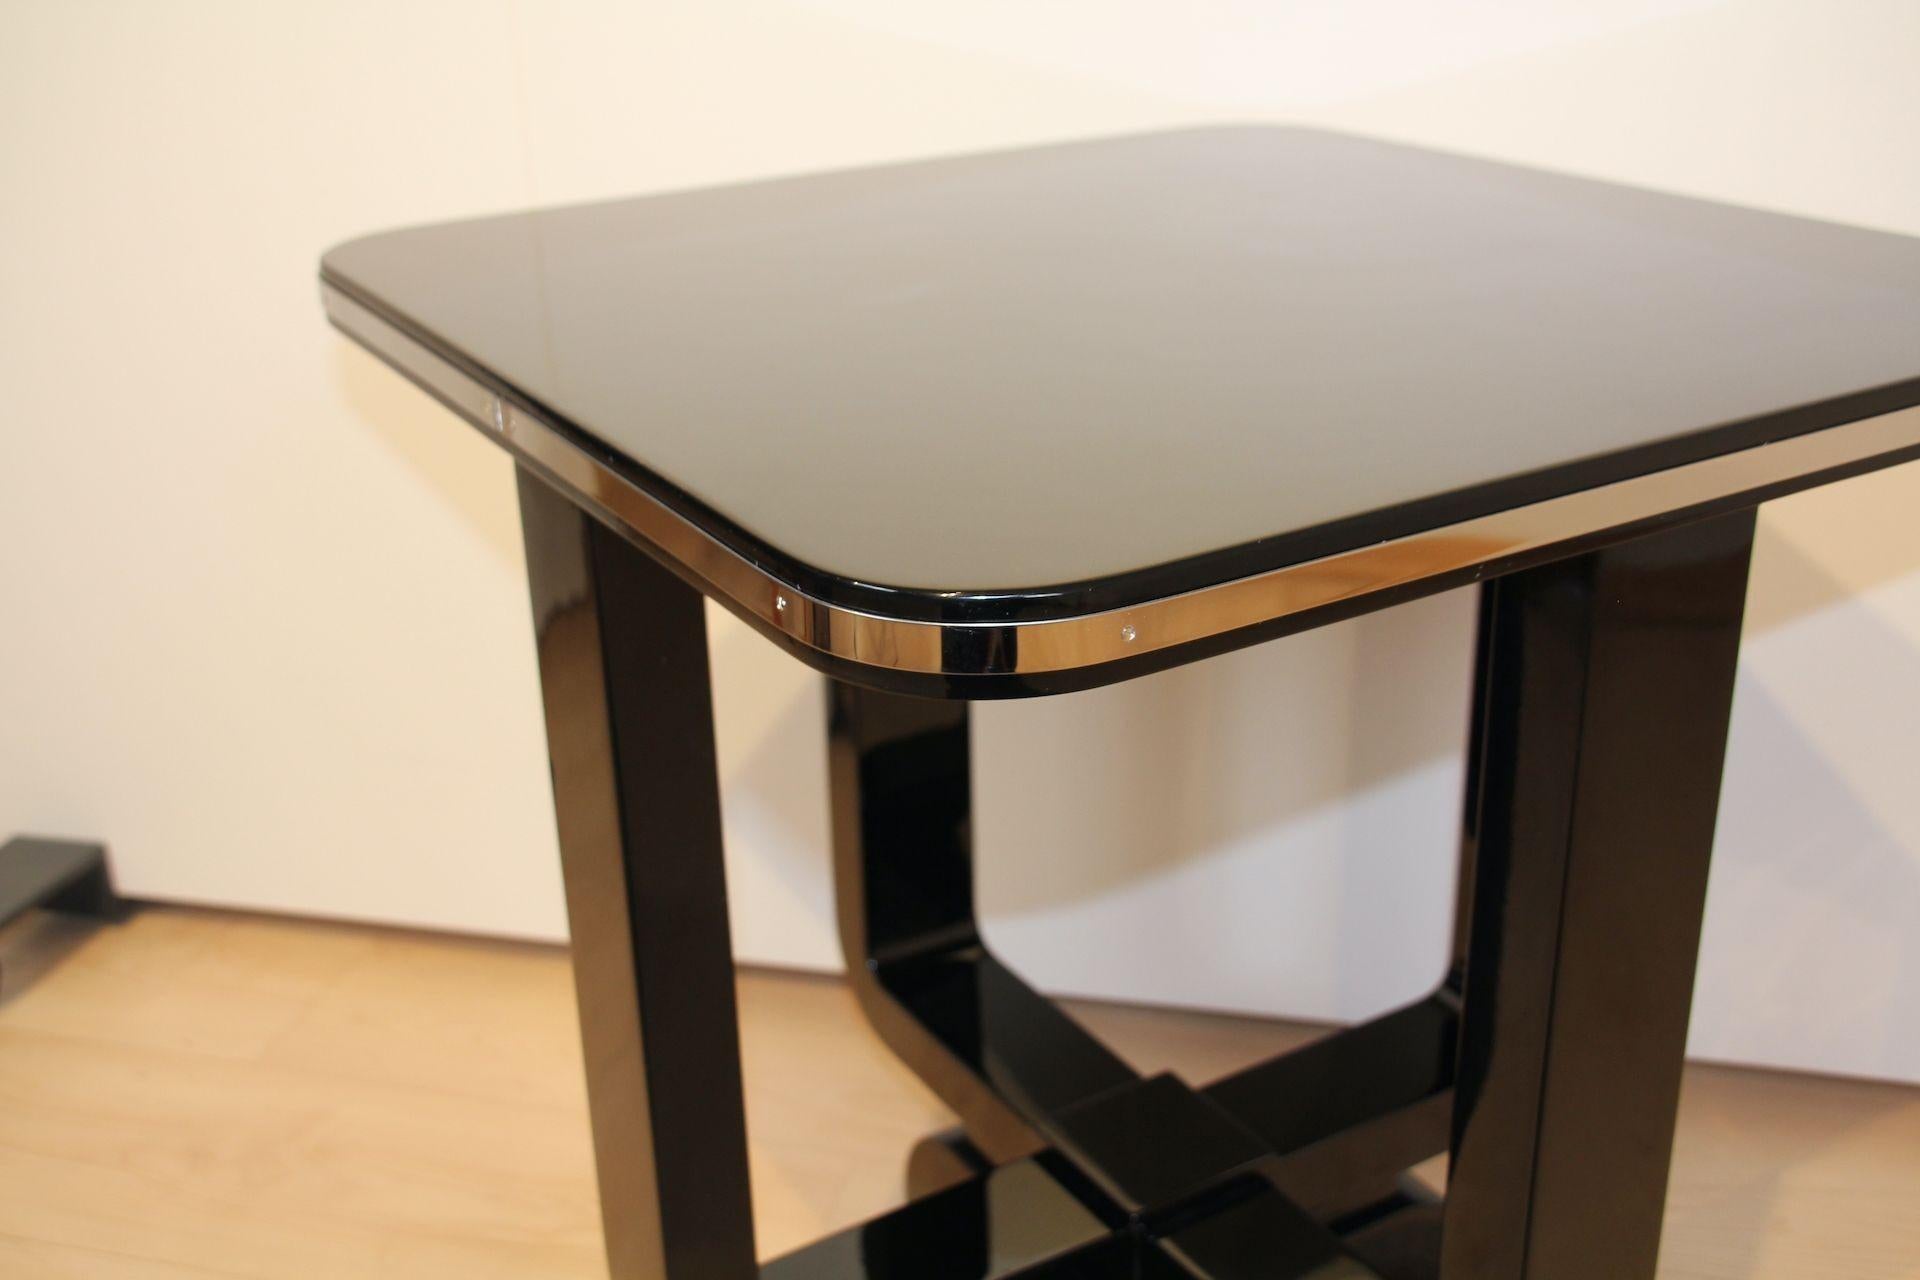 Four-legged Art Deco Side Table, Black Lacquer and Metal, France circa 193 4